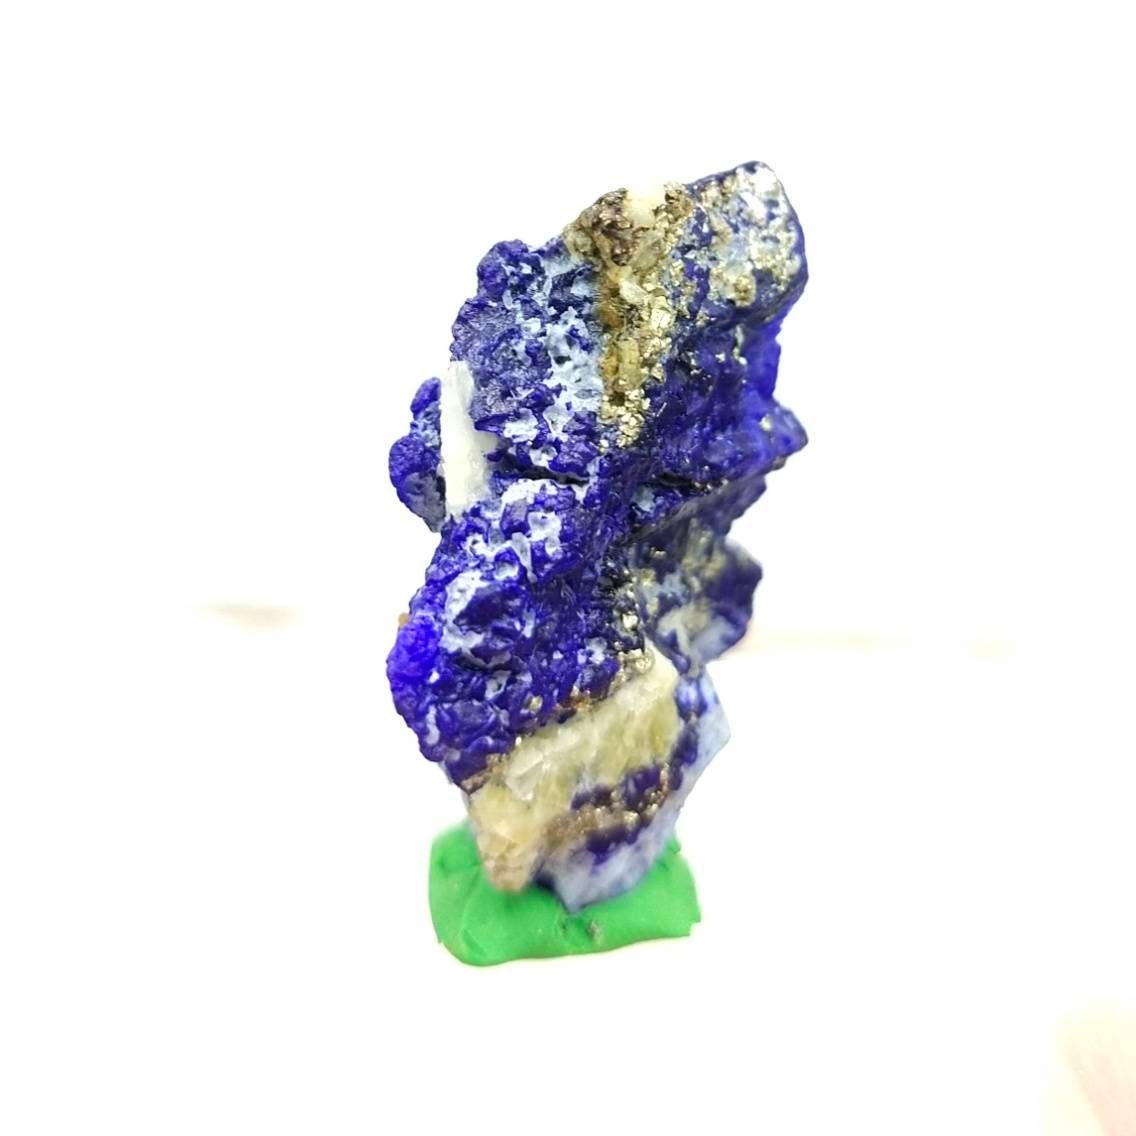 ARSAA GEMS AND MINERALSAfghan hayune var lazurite crystal with rich blue color from Afghanistan, 18.7 grams - Premium  from ARSAA GEMS AND MINERALS - Just $50.00! Shop now at ARSAA GEMS AND MINERALS